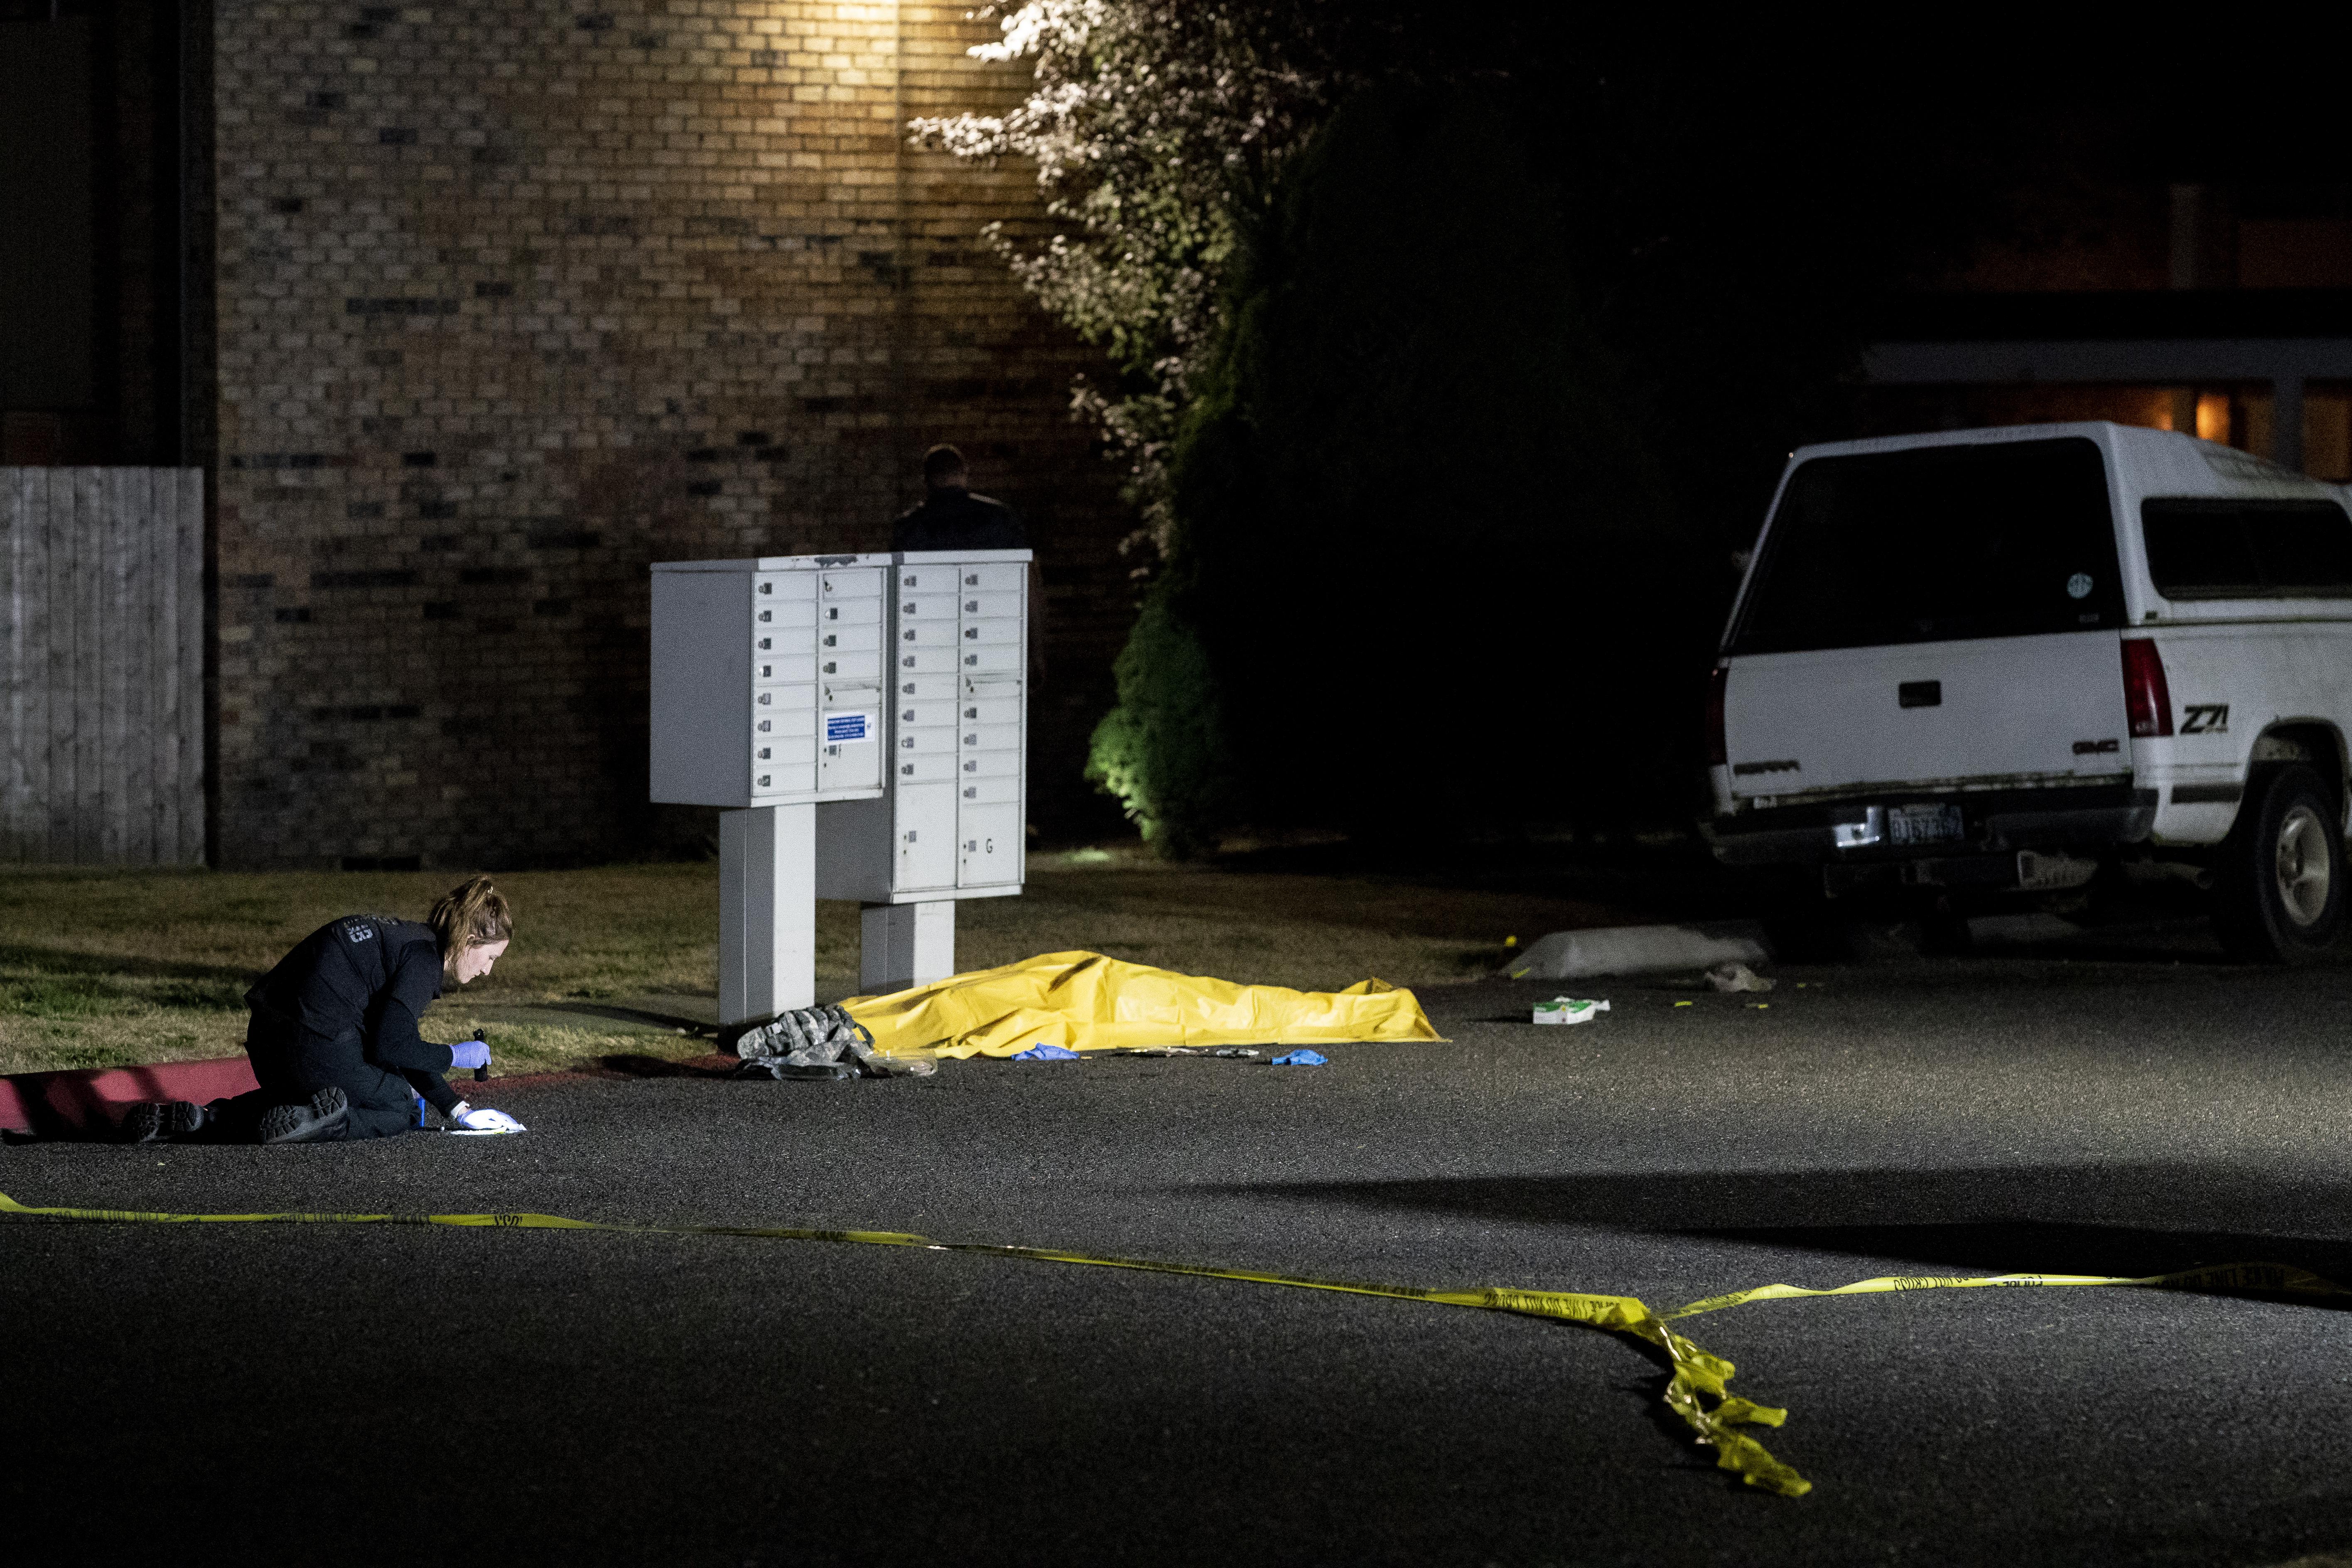 An investigator, kneeling, inspects something on the ground next to the dead body, which is covered by a tarp underneath a mailbox